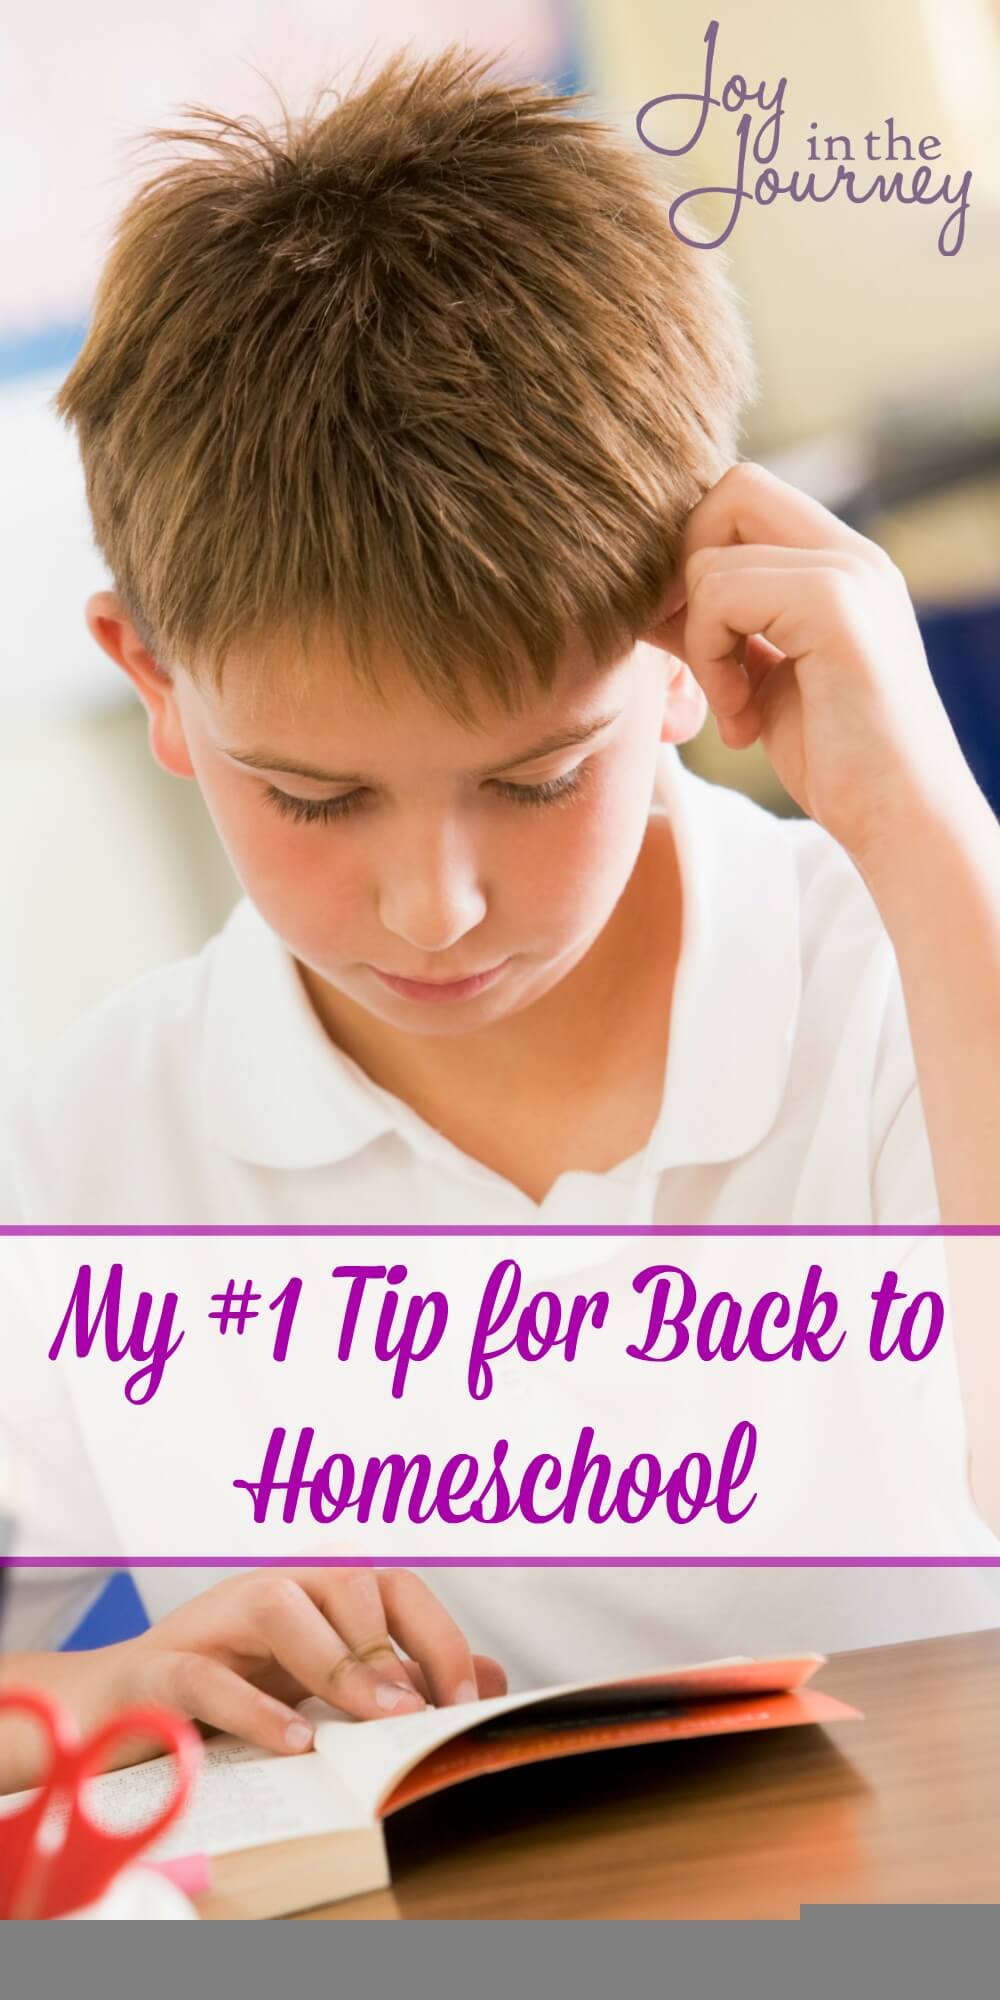 As we all prep for back to school, I am sharing some fun advice and information about our homeschool including my number one tip for back to school! 